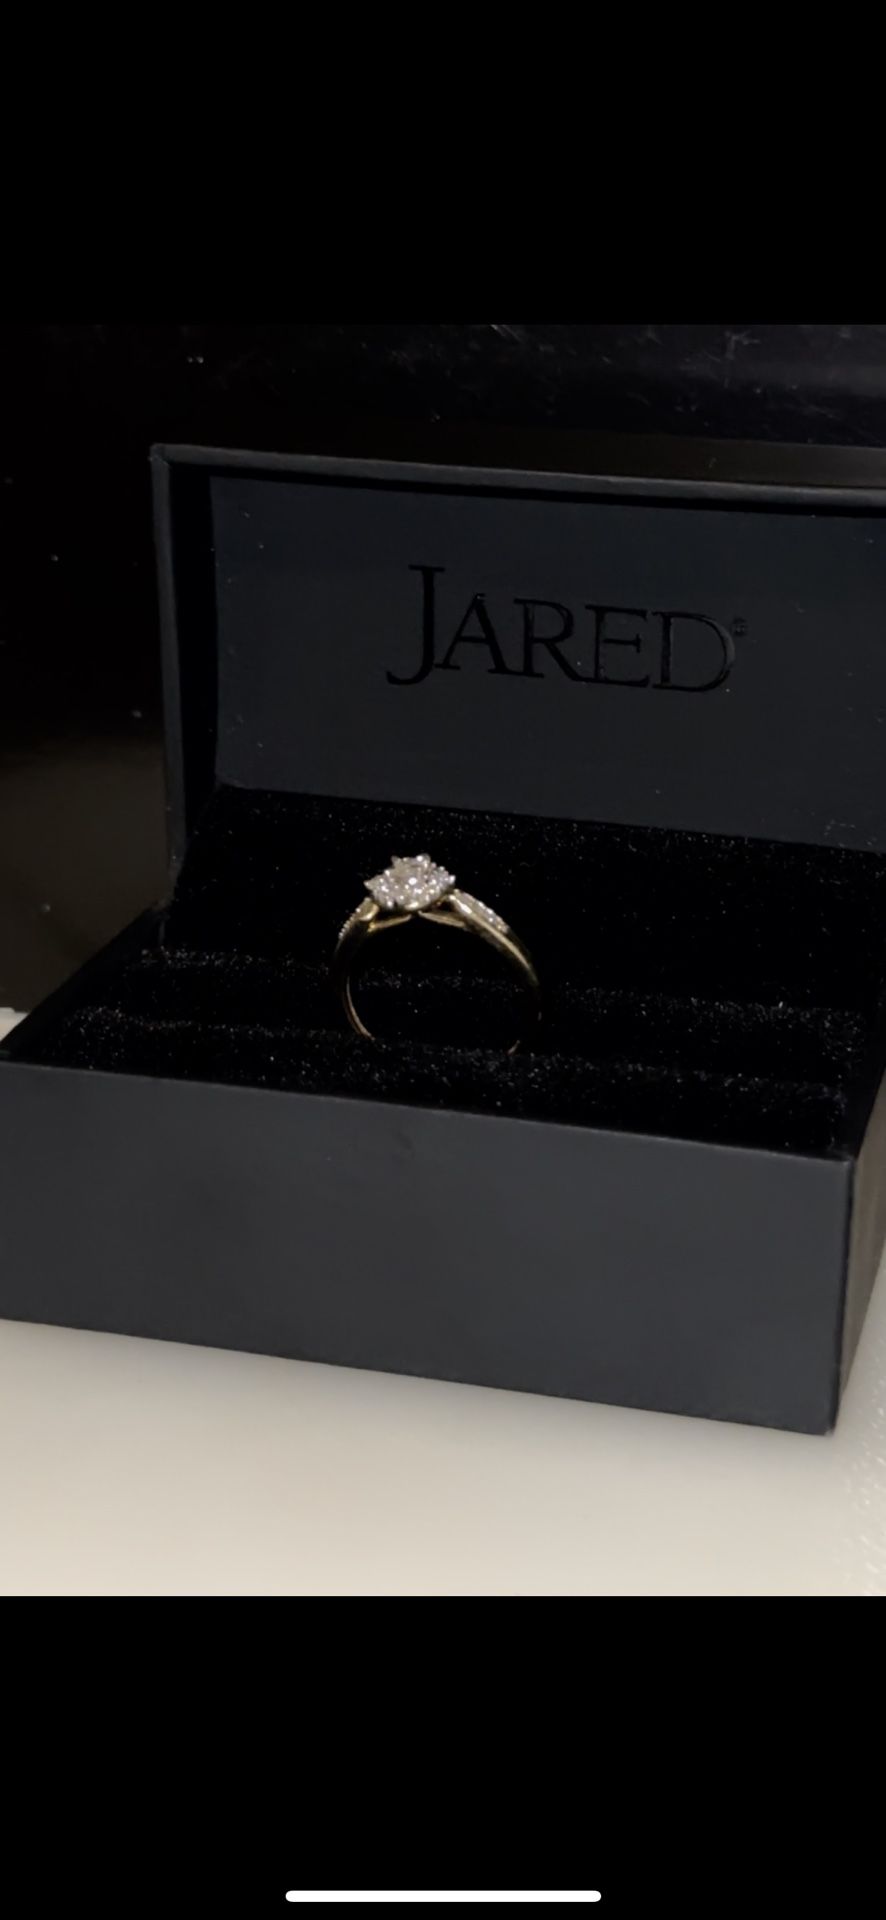 Promise/Engagement Ring